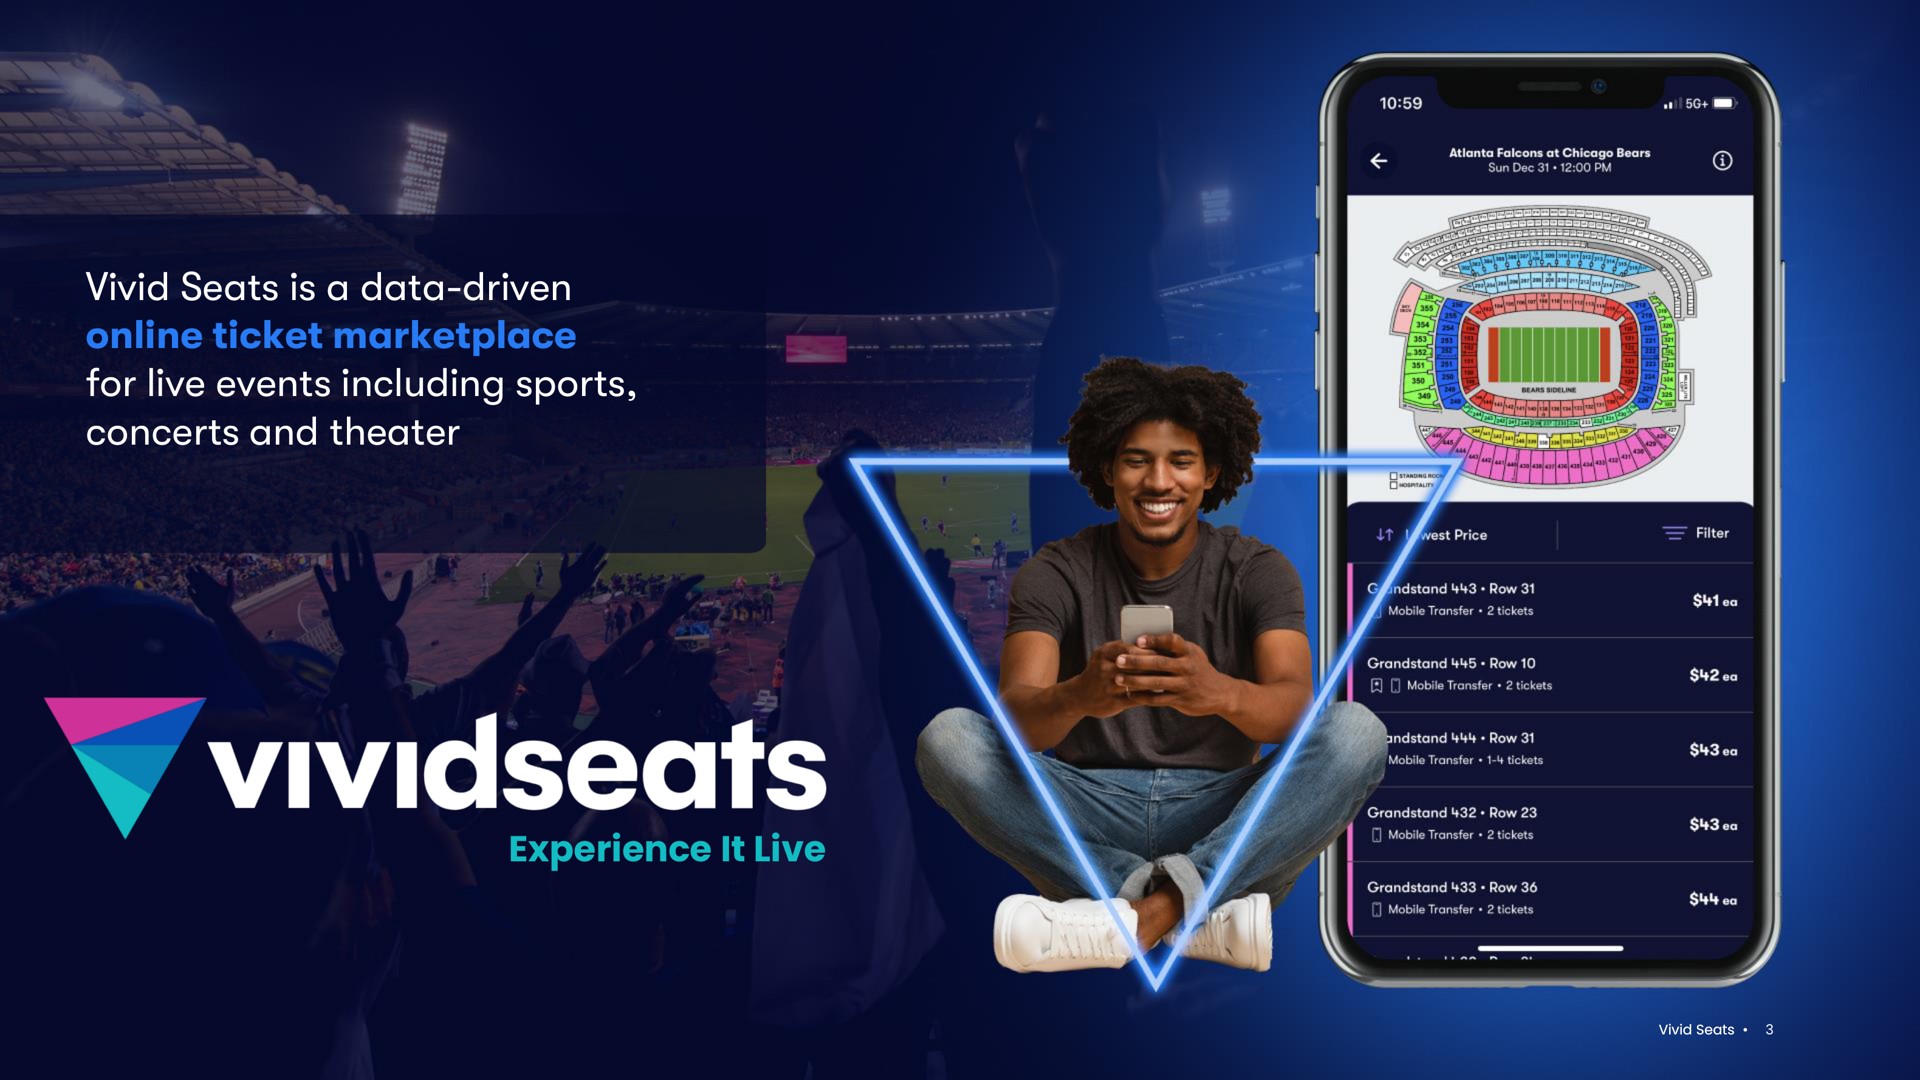 vivid seats is a data driven ticket for live events including sports concerts and theater | Vivid Seats